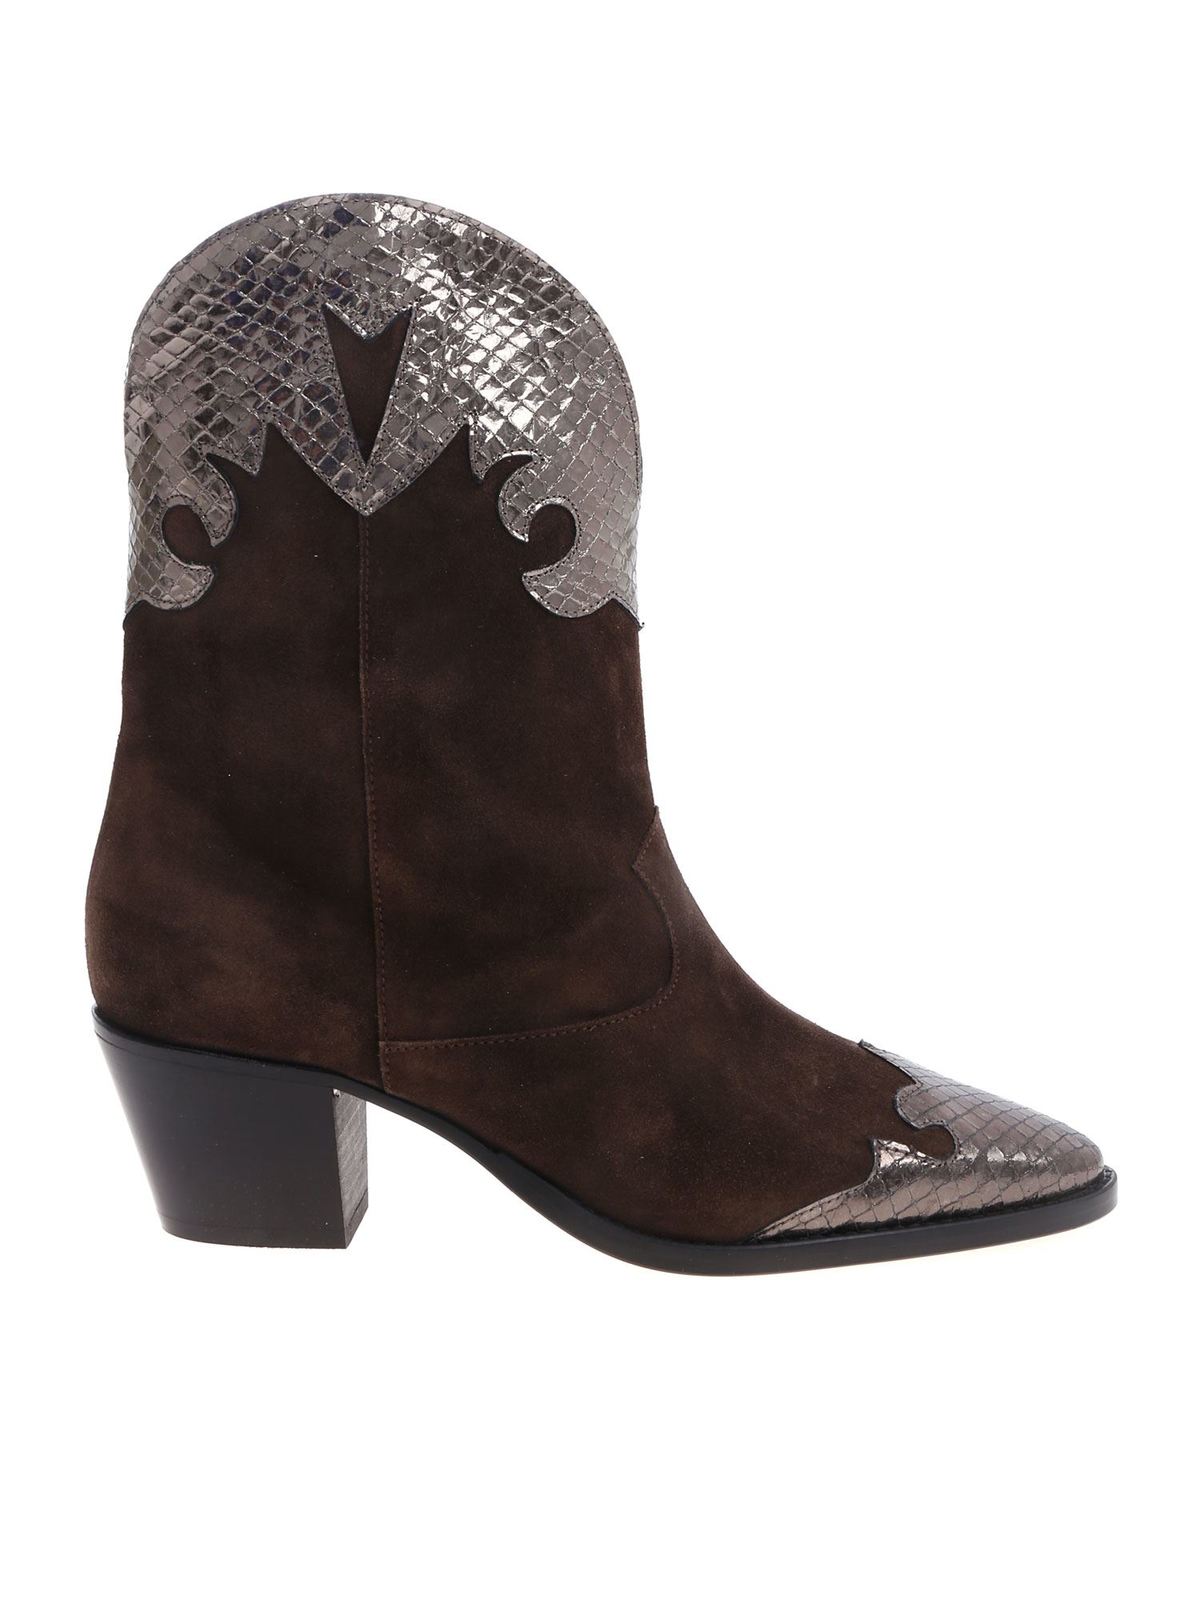 PARIS TEXAS BROWN AND GRAY SUEDE BOOTS BY PARIS TEXAS